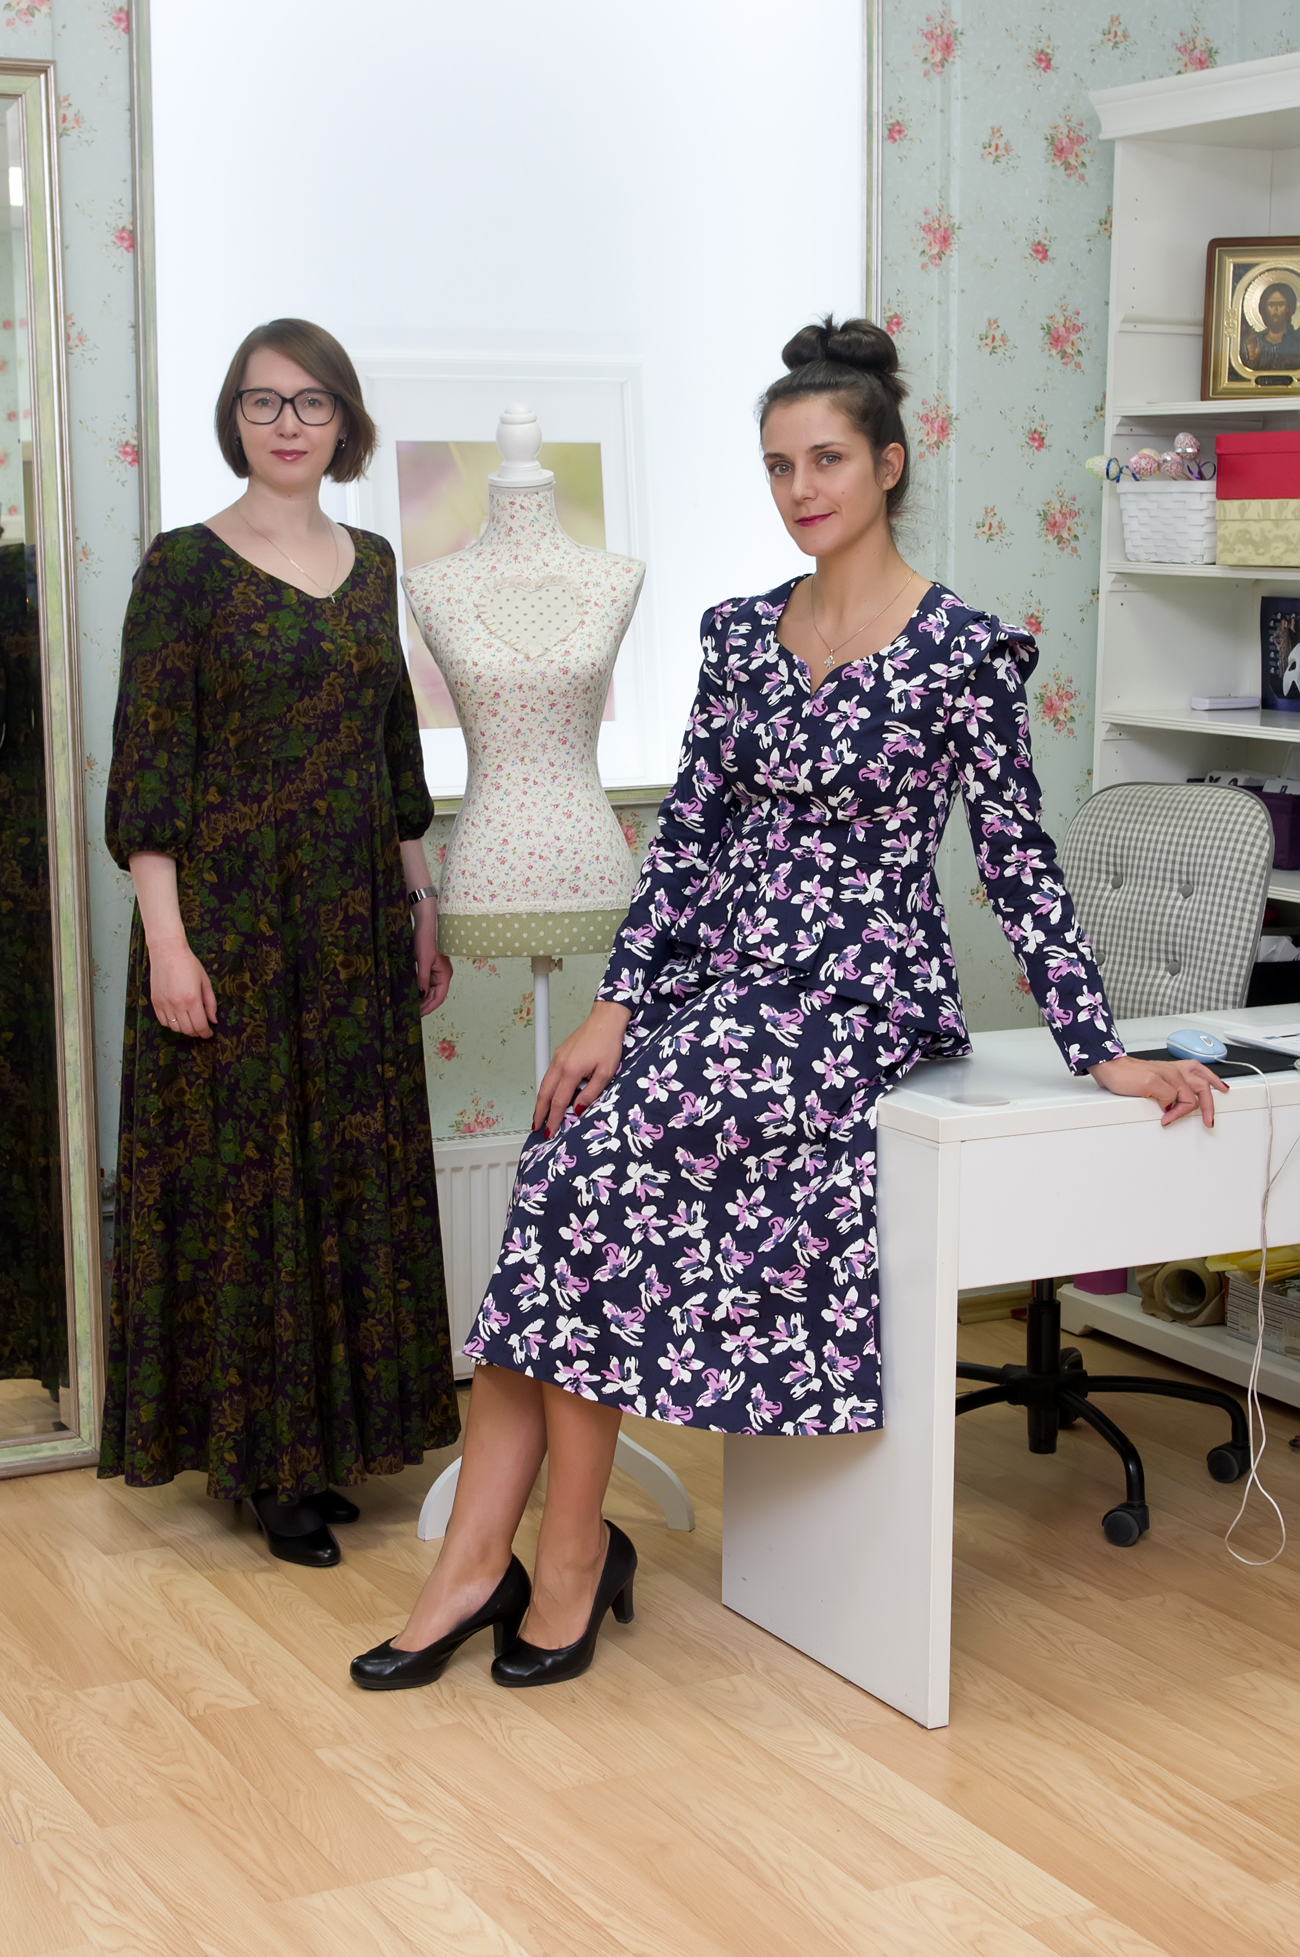 "We cannot say that there is an increase in demand for these clothes just because Orthodoxy has a broad following. Remember that among the store's clients fewer than half come because it sells Orthodox attire,” says Sibiryova. Source: Press Photo